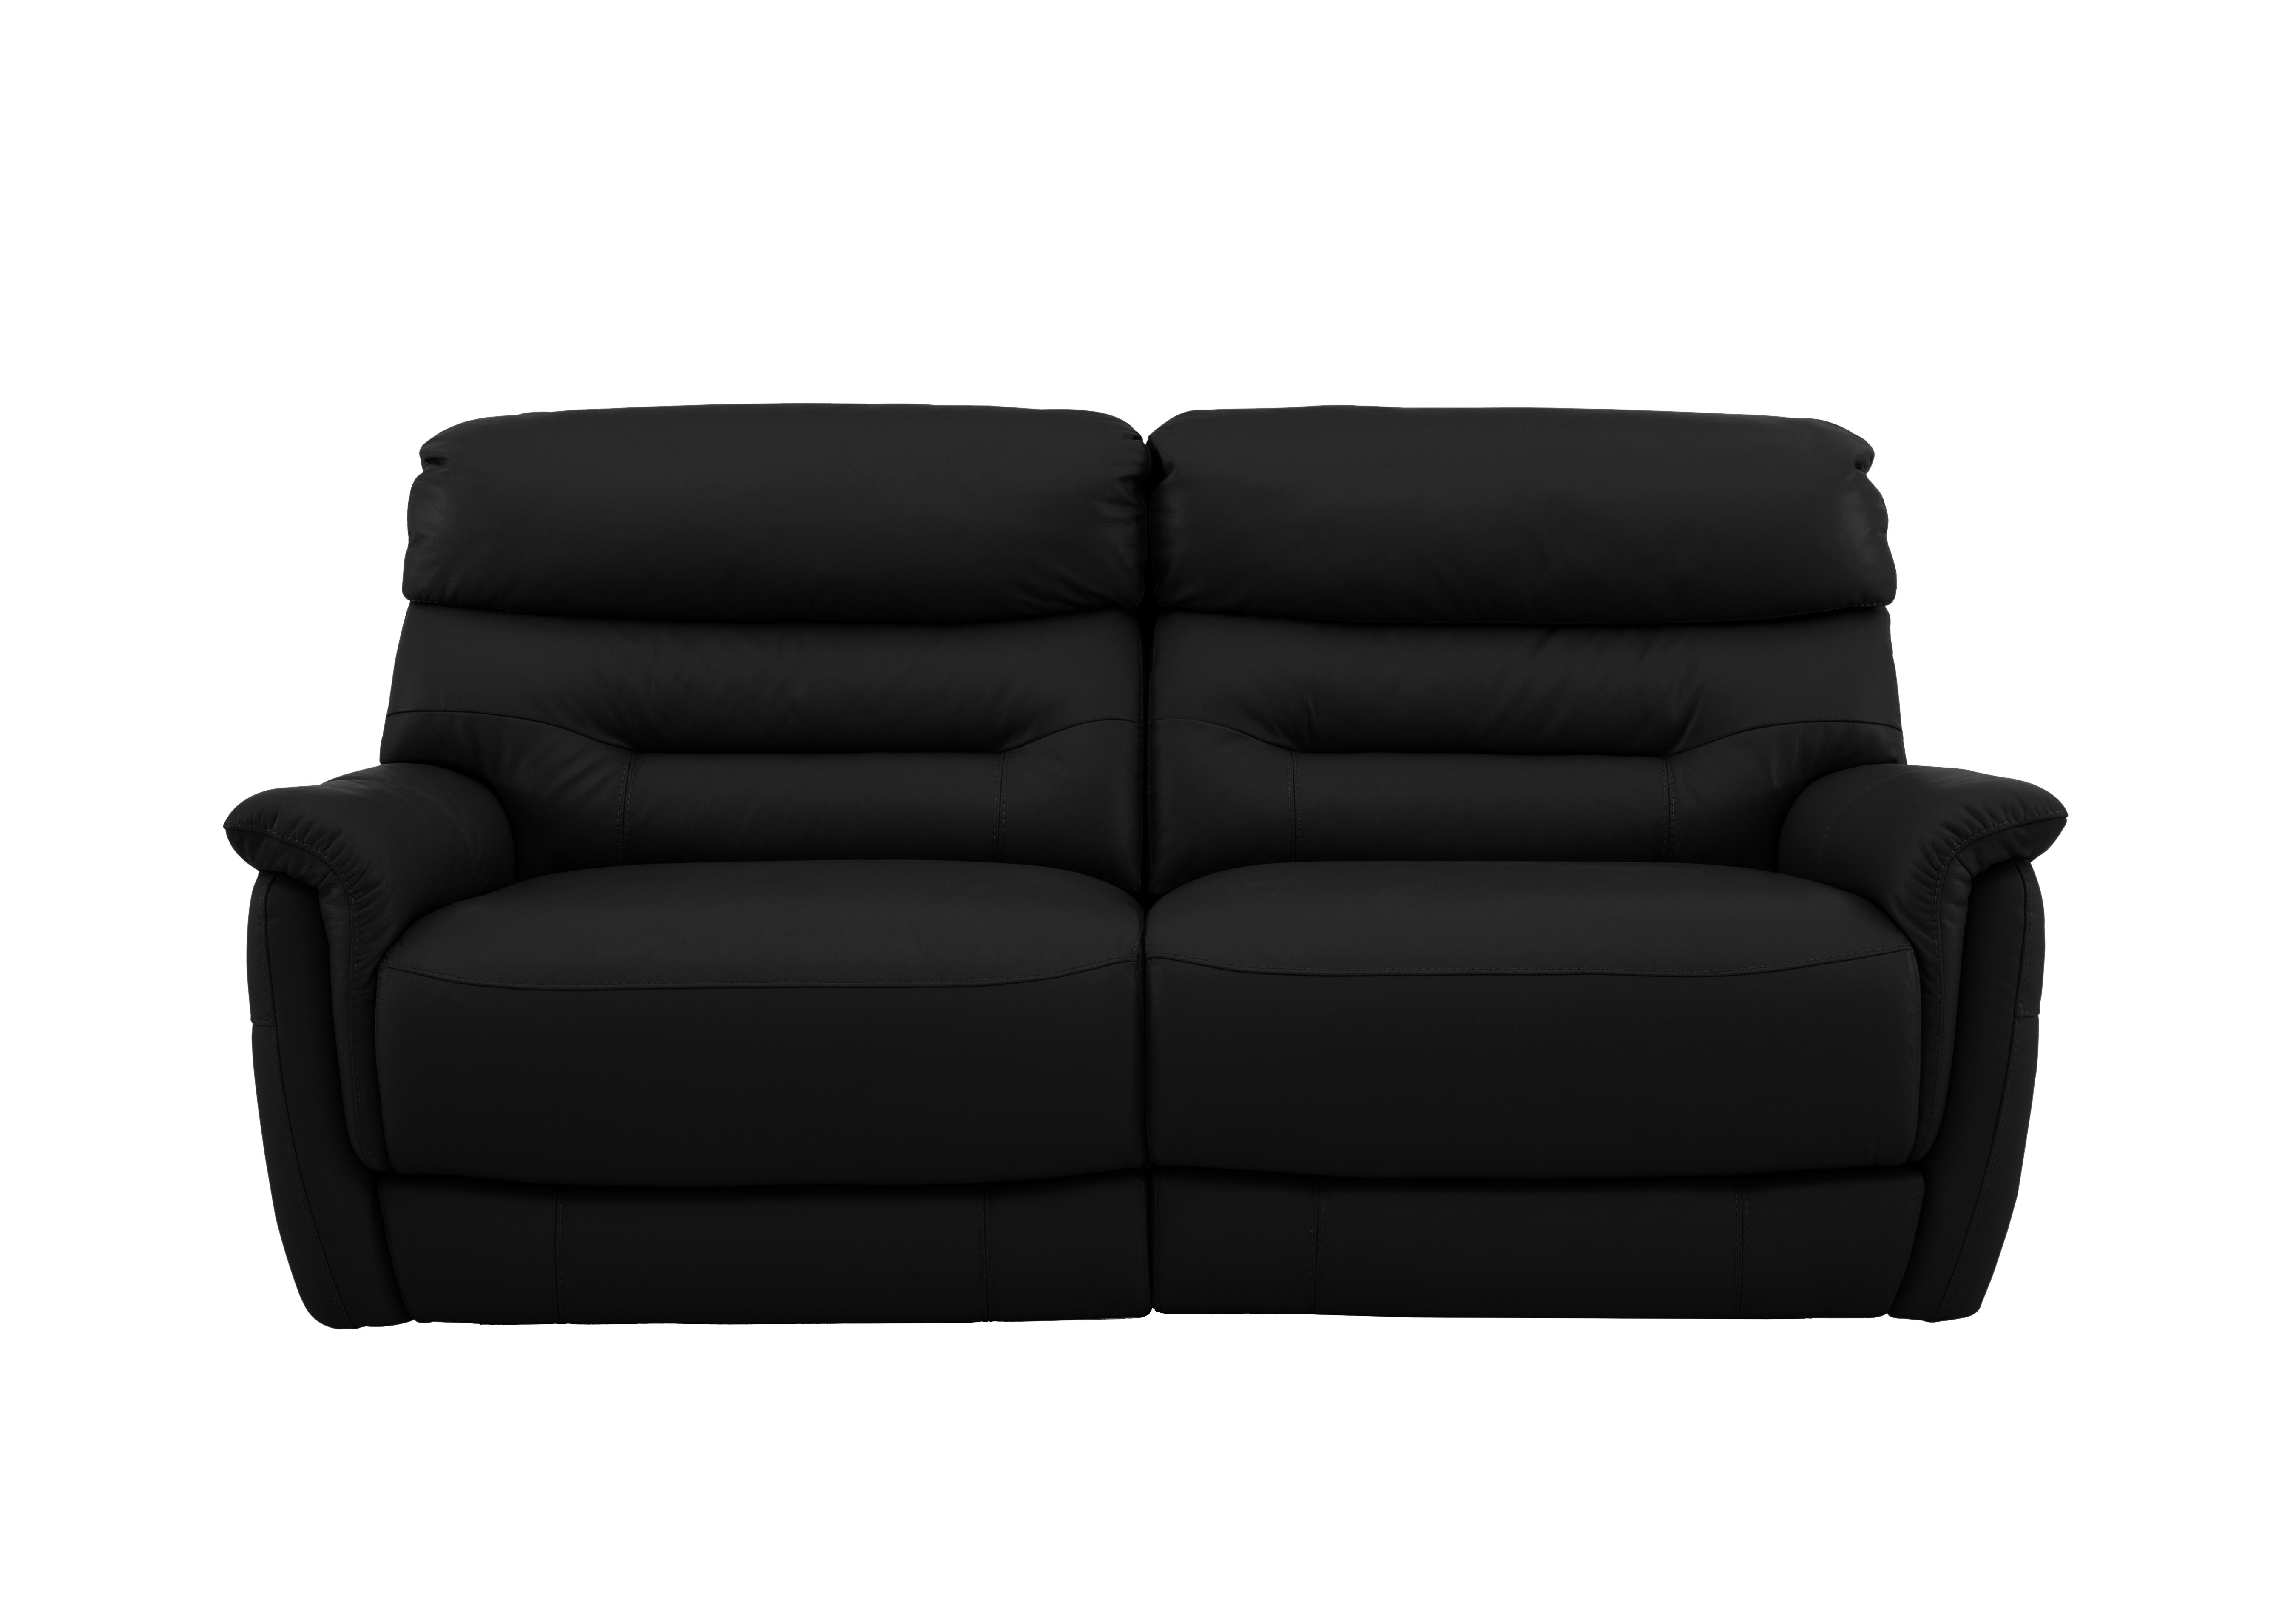 Chicago 3 Seater Leather Sofa in An-671b Black on Furniture Village